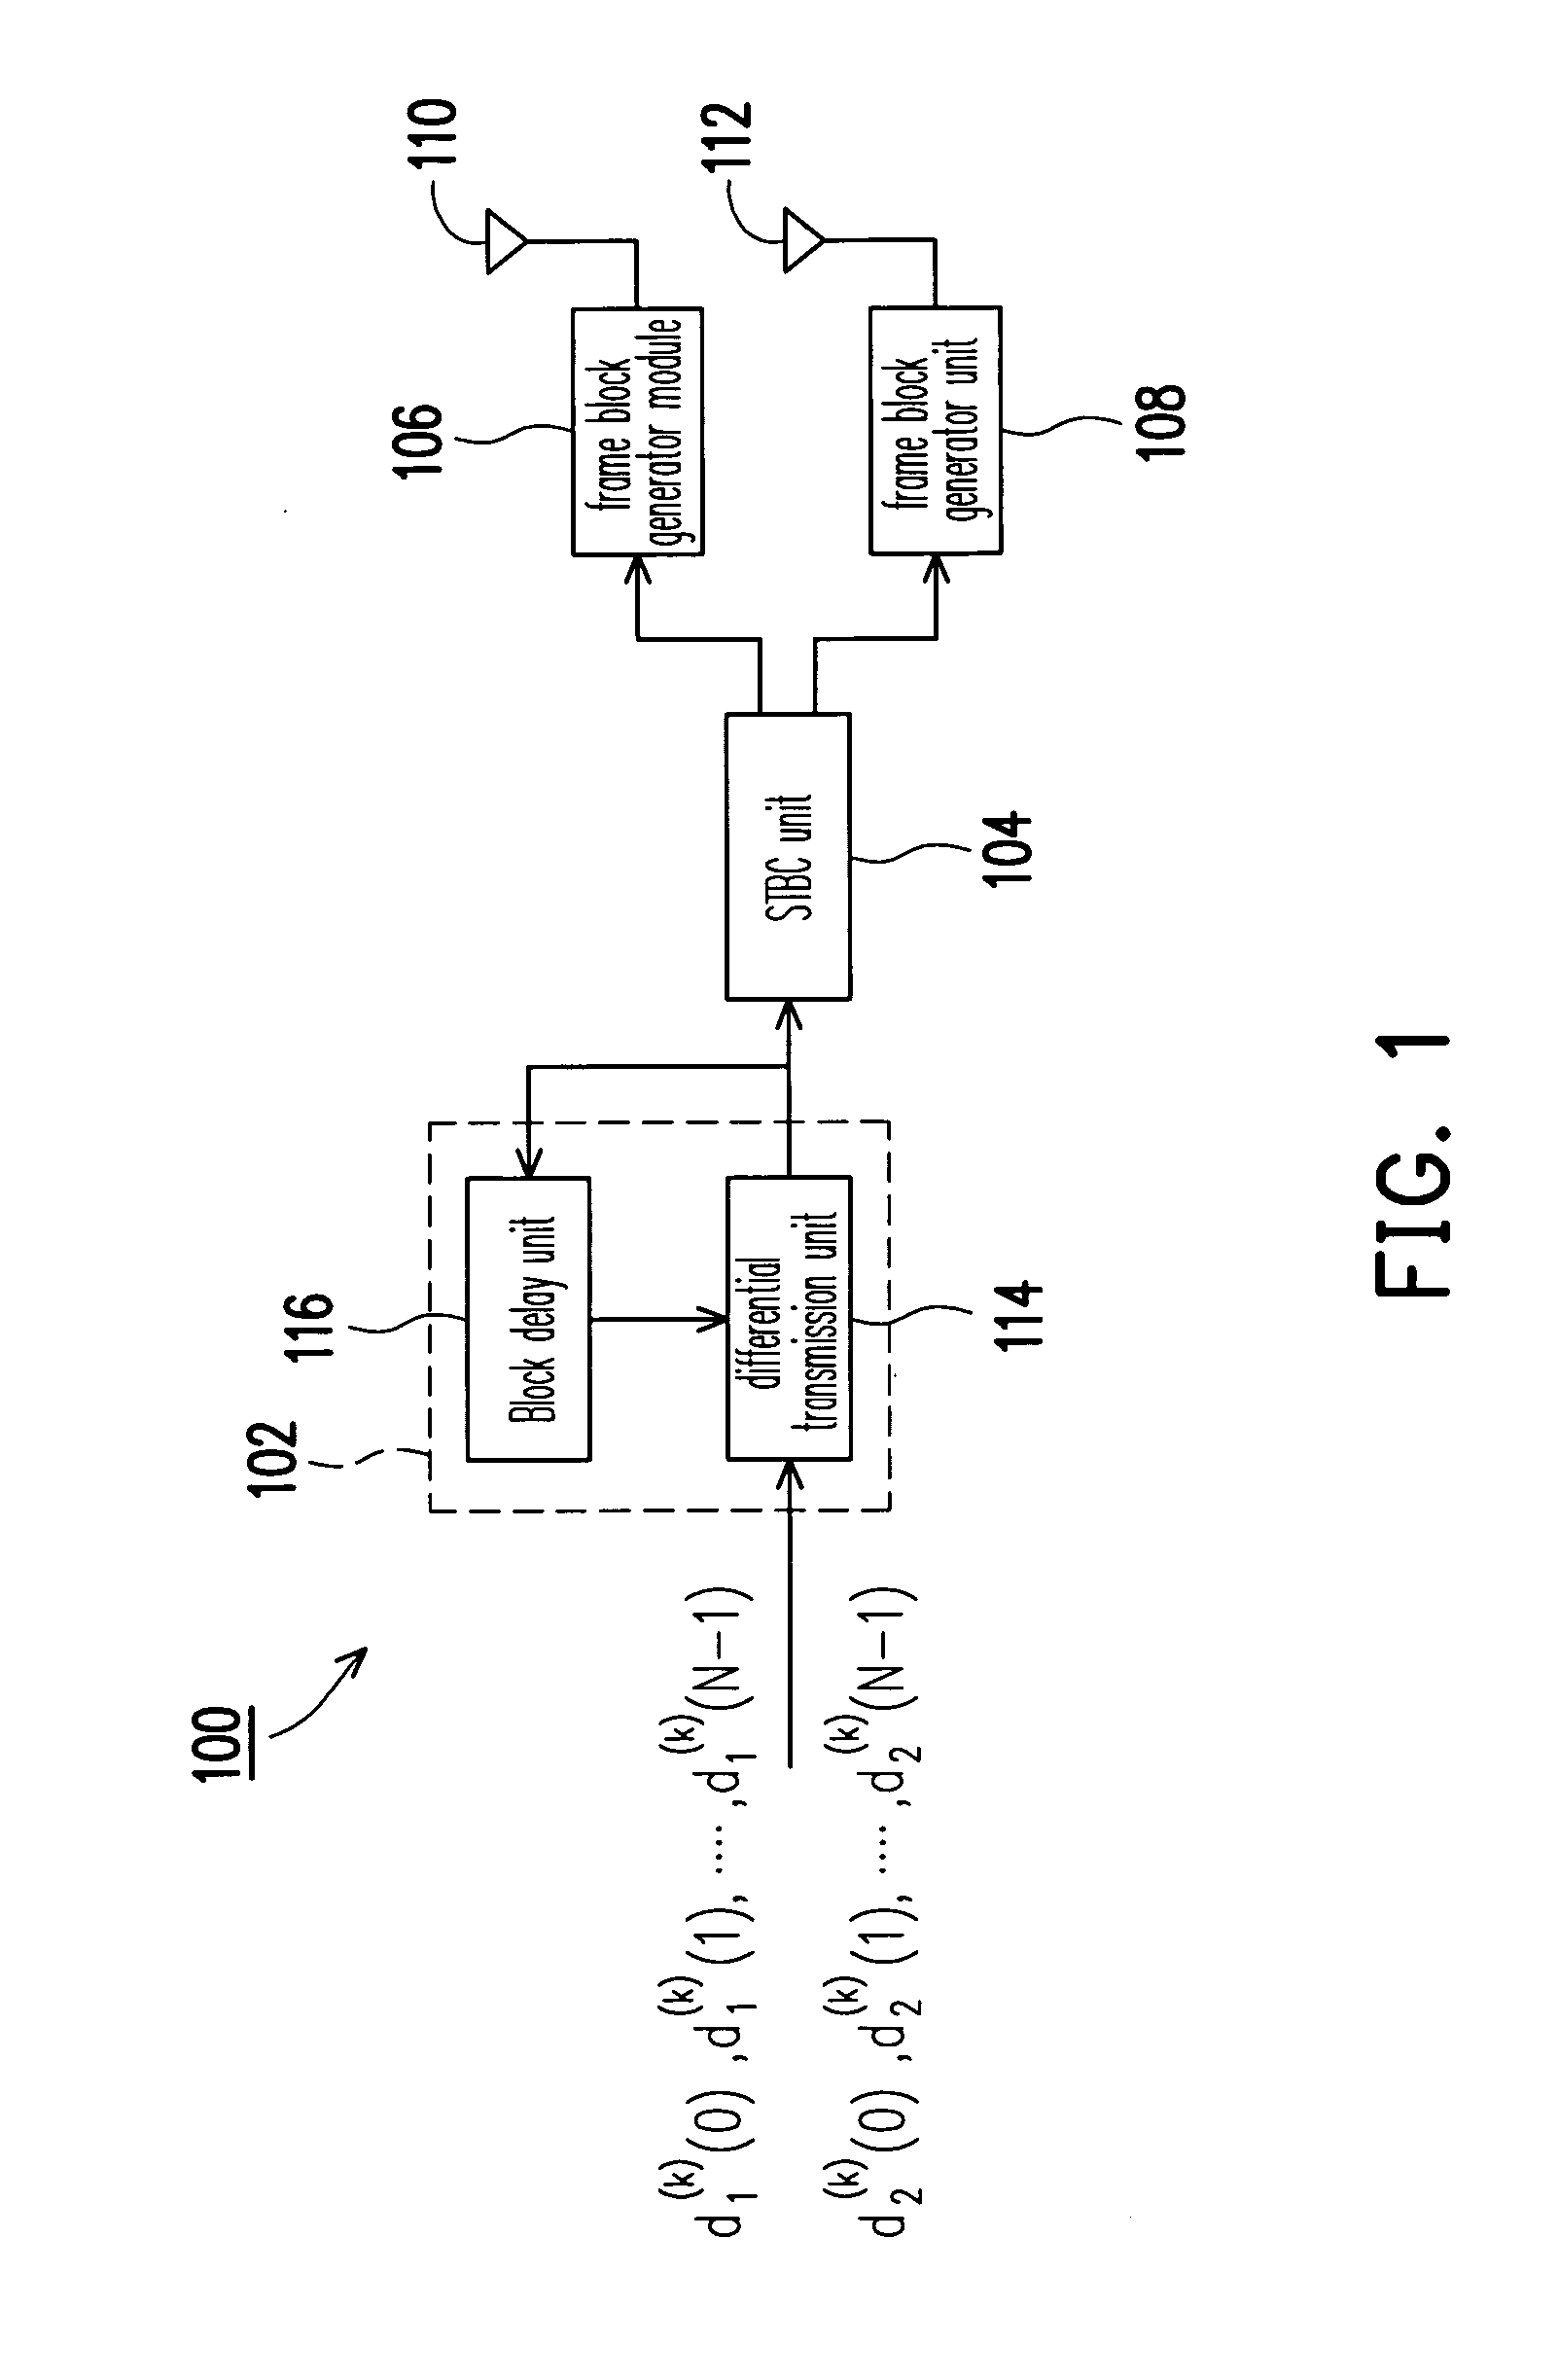 Equipment and method for MIMO SC-FED communication system